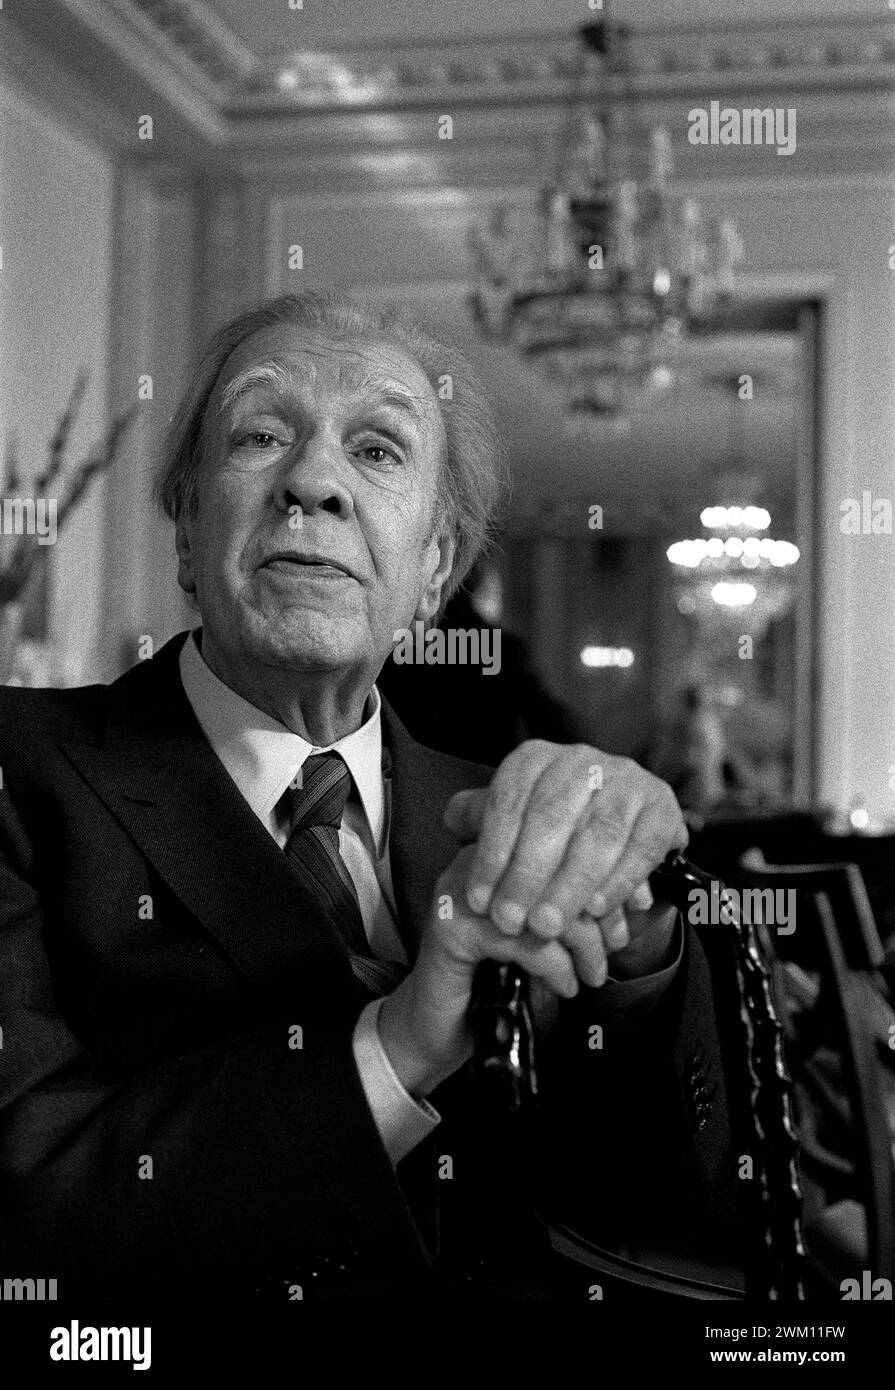 3825280 Jorge Luis Borges; (add.info.: Rome, Westin Excelsior Hotel, 1981. Argentinian writer Jorge Luis Borges / Roma, Hotel Westin Excelsior, 1981. Lo scrittore argentino Jorge Luis Borges); © Marcello Mencarini. All rights reserved 2024. Stock Photo